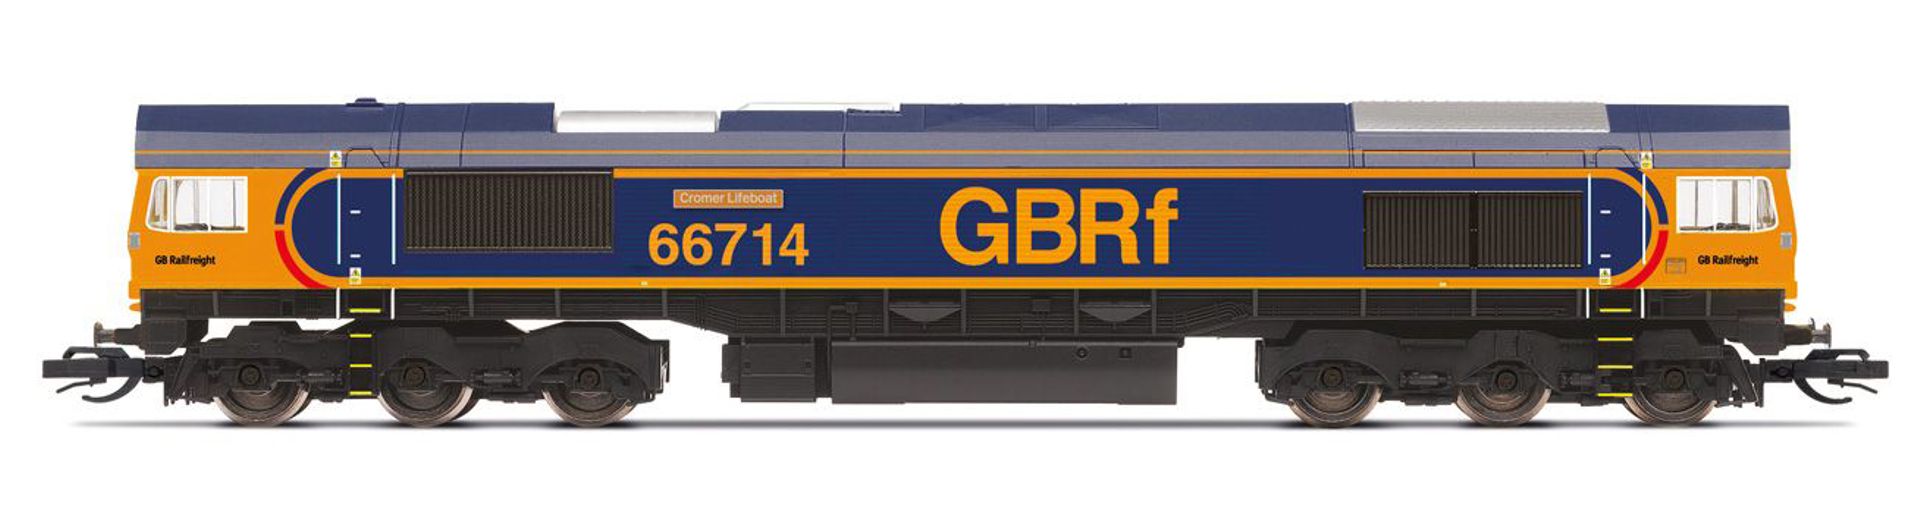 Hornby TT3016M - GBRf, Class 66, Co-Co, 66714 'Cromer Lifeboat', Ep.VI